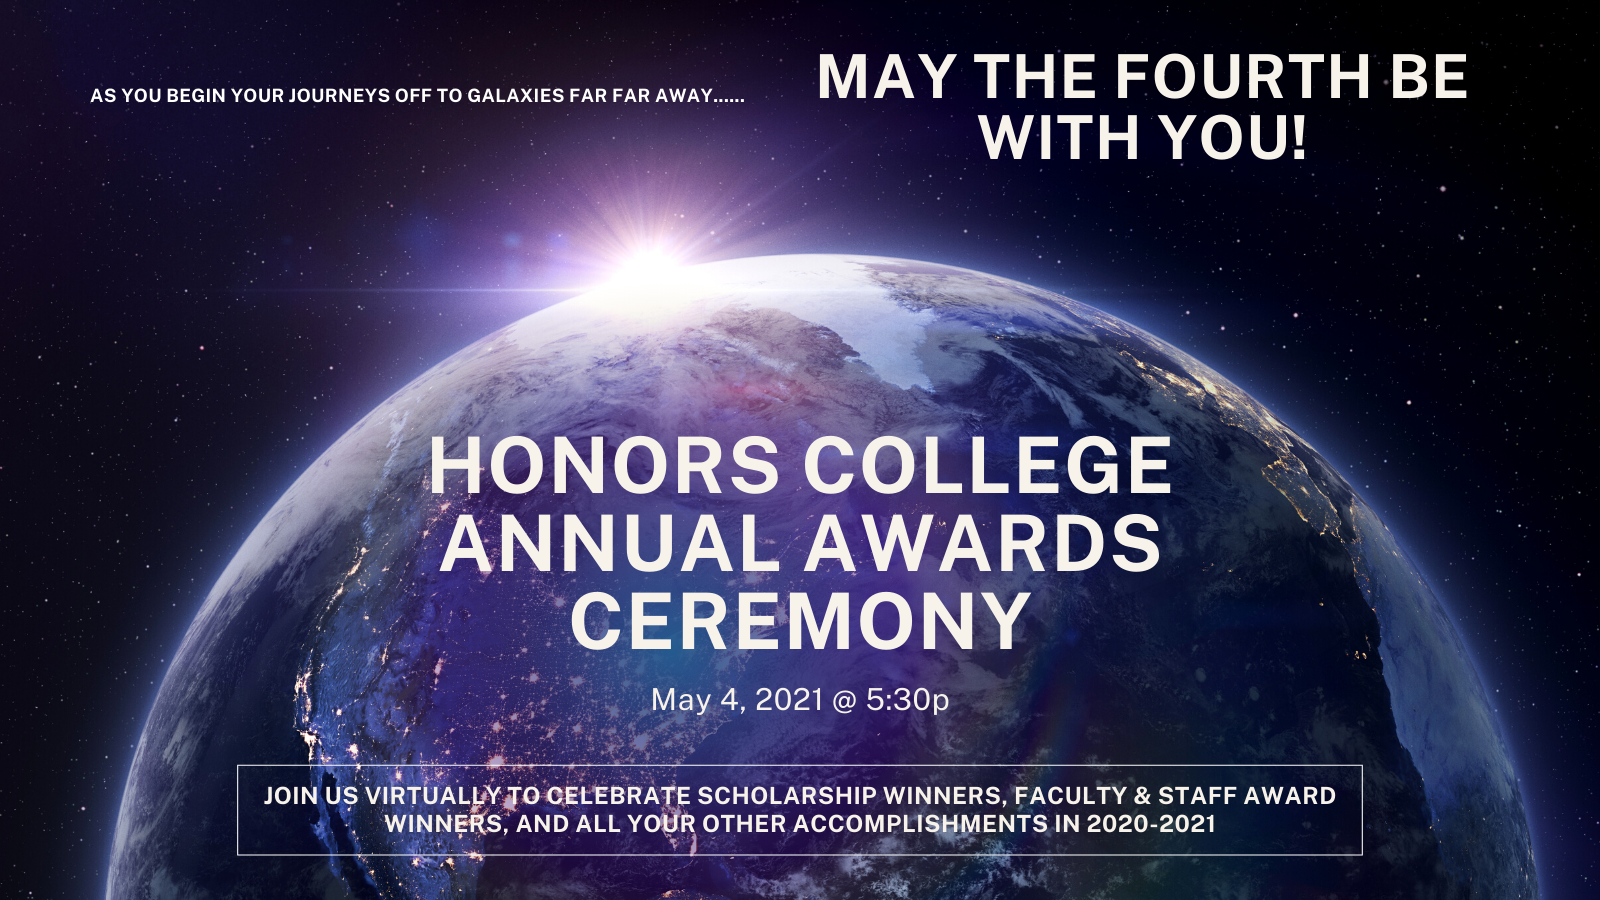 Honors College Annual Awards Ceremony 2021